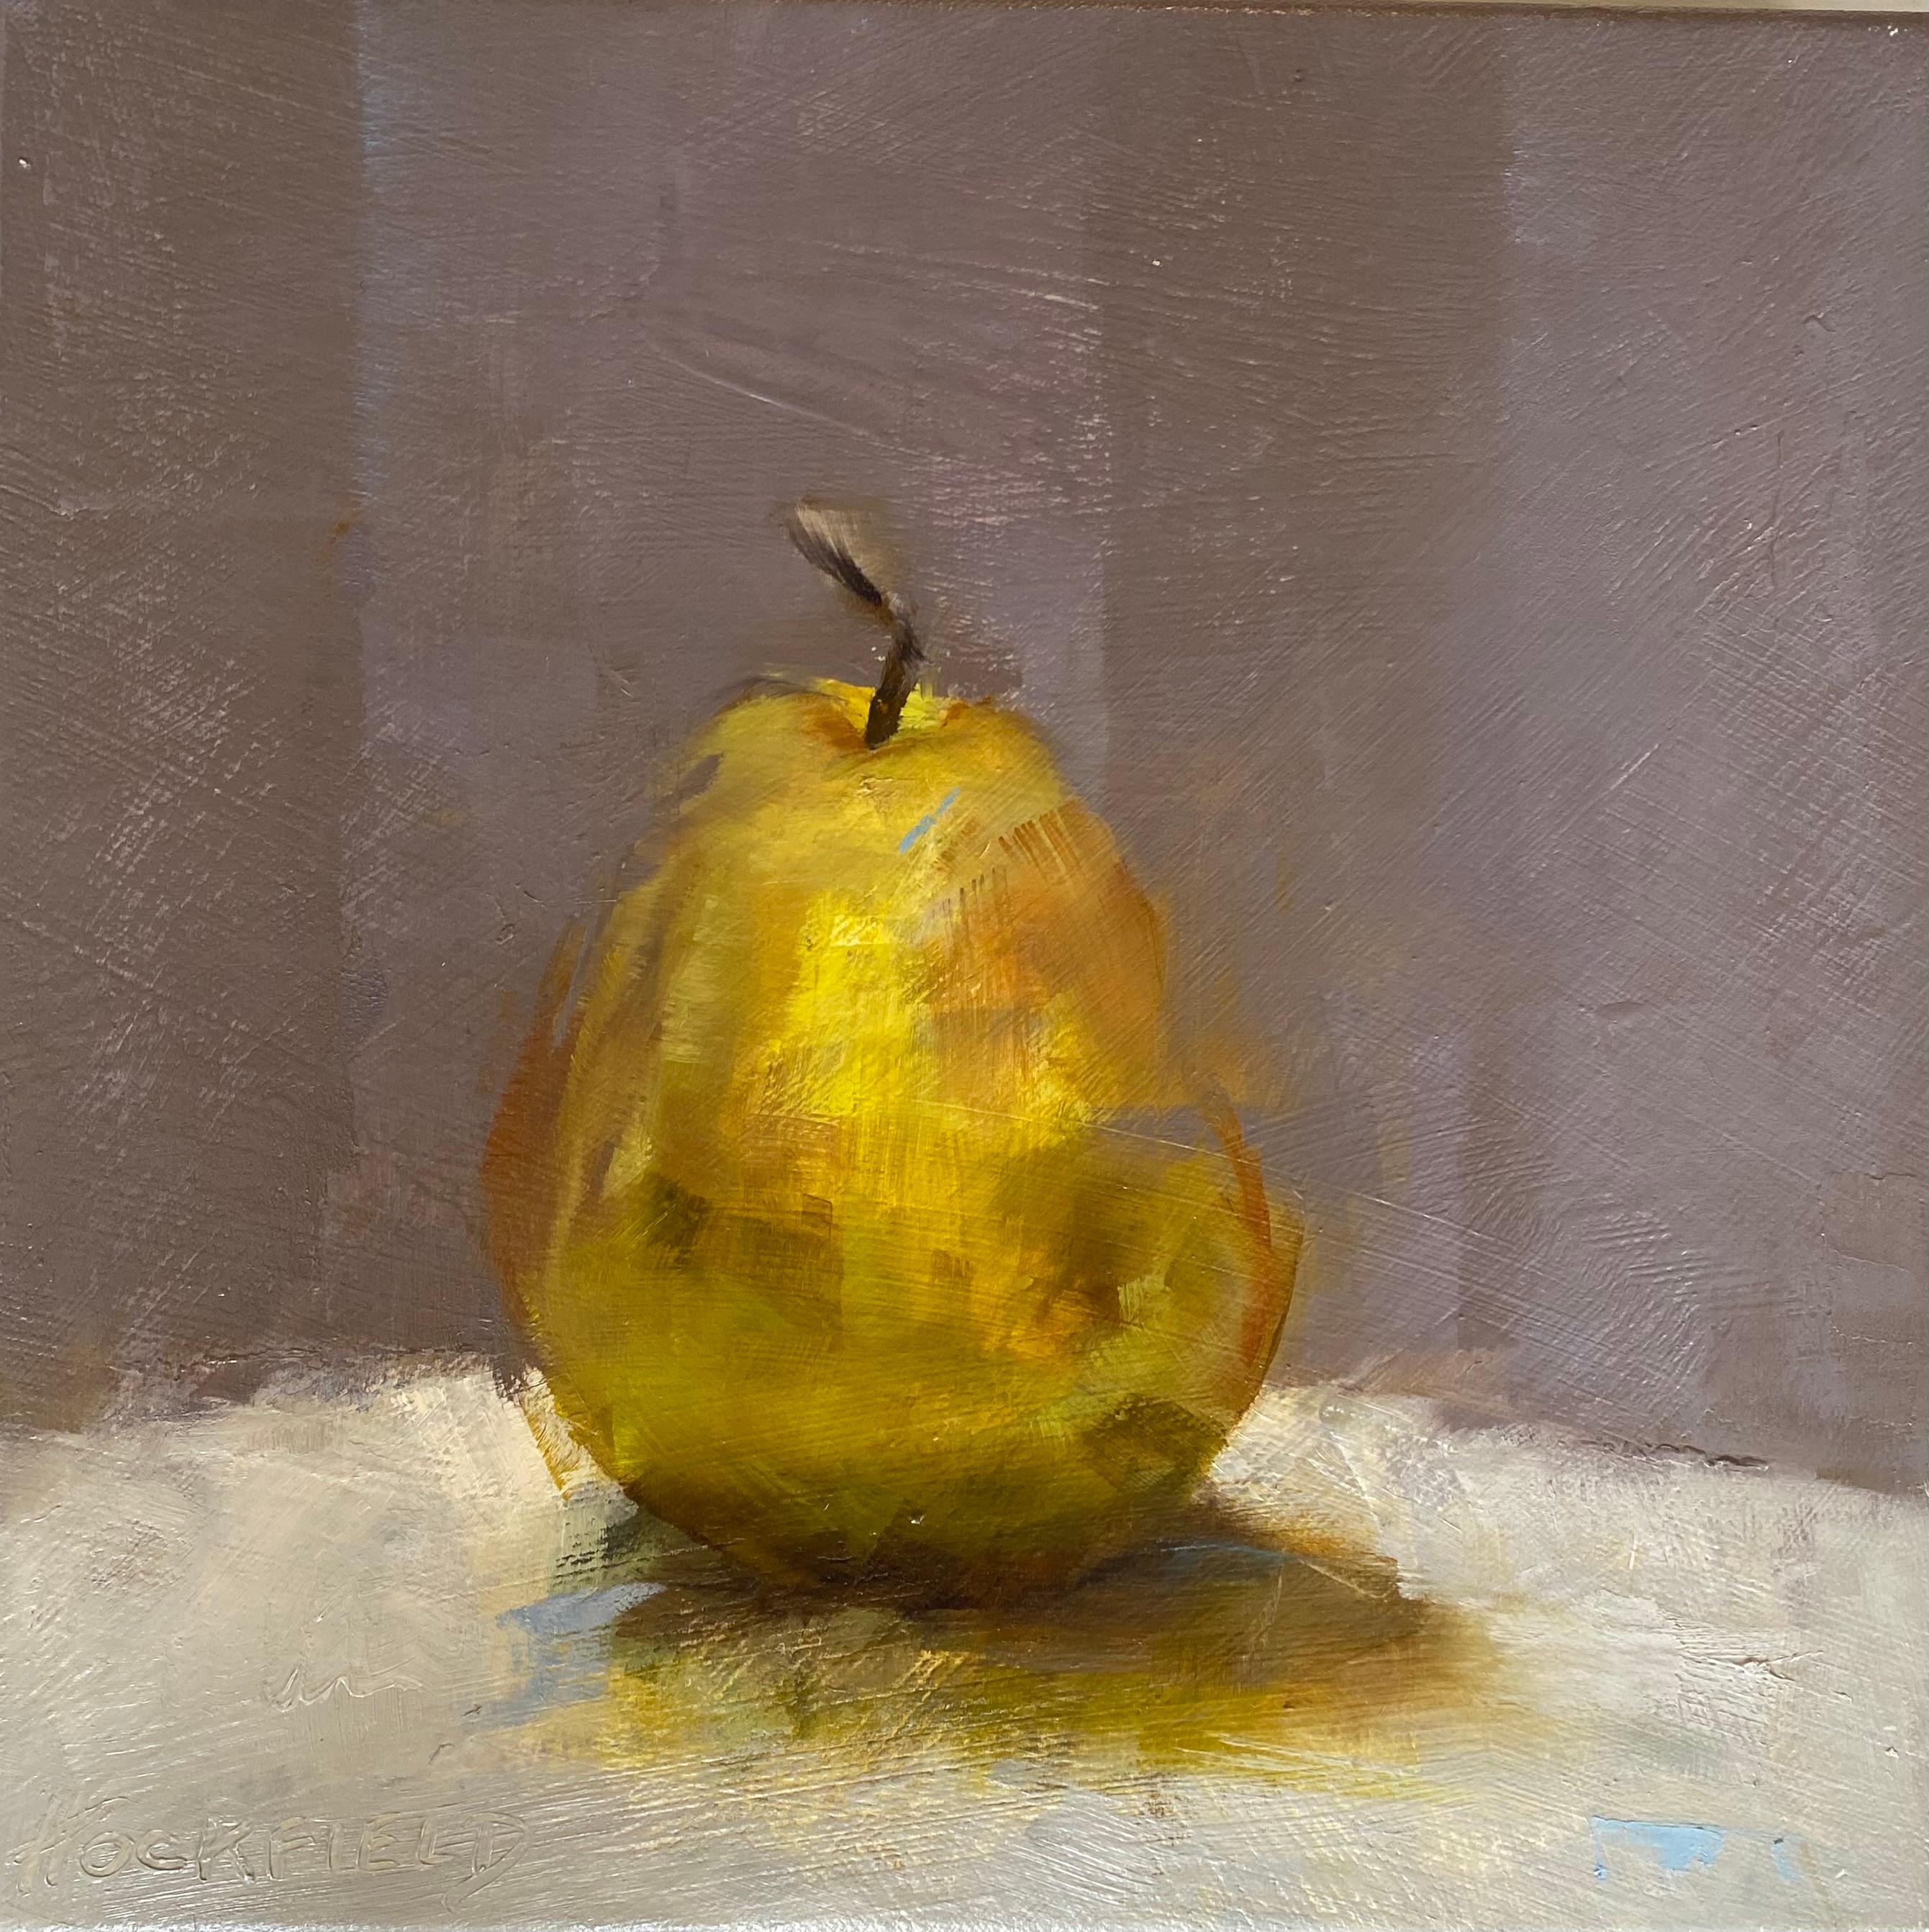 This square oil on canvas painting by American artist Sharon Hockfield is entitled "Harry and David" was created in 2023. One singular pear is depicted in this piece, placed front and center in the composition. The light is shining behind the pear,